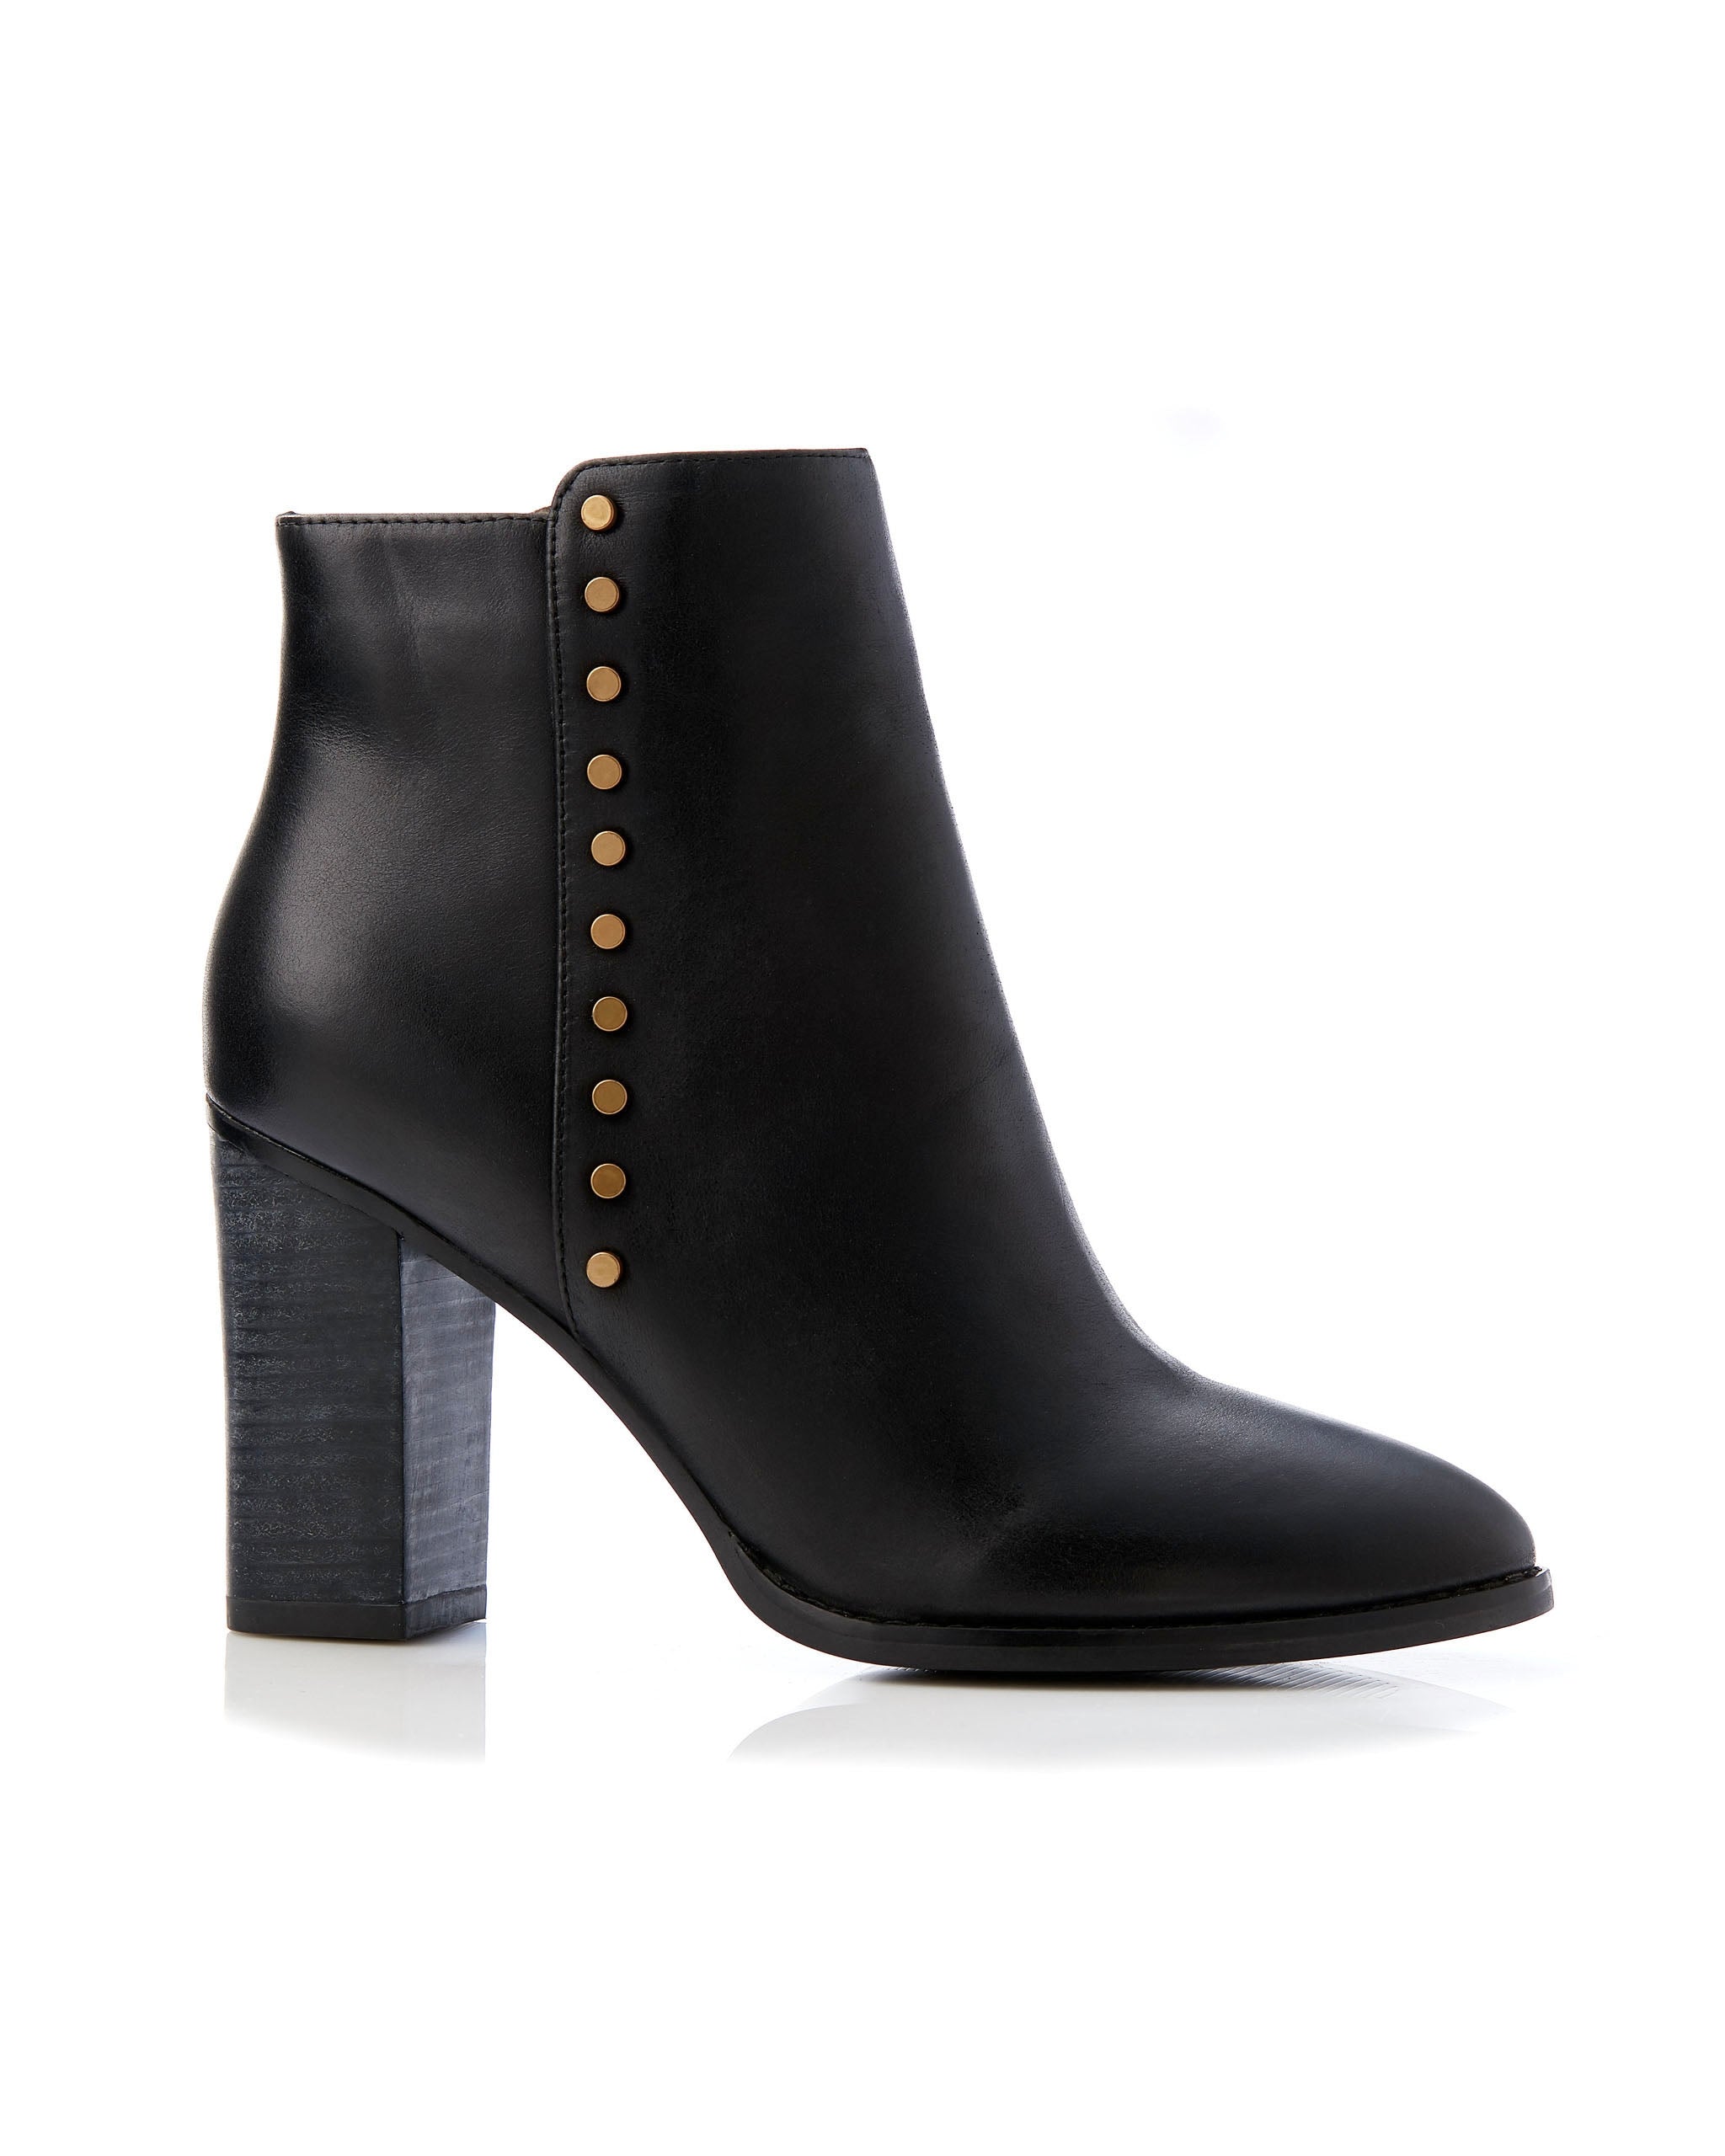 Gina Black Leather Boot